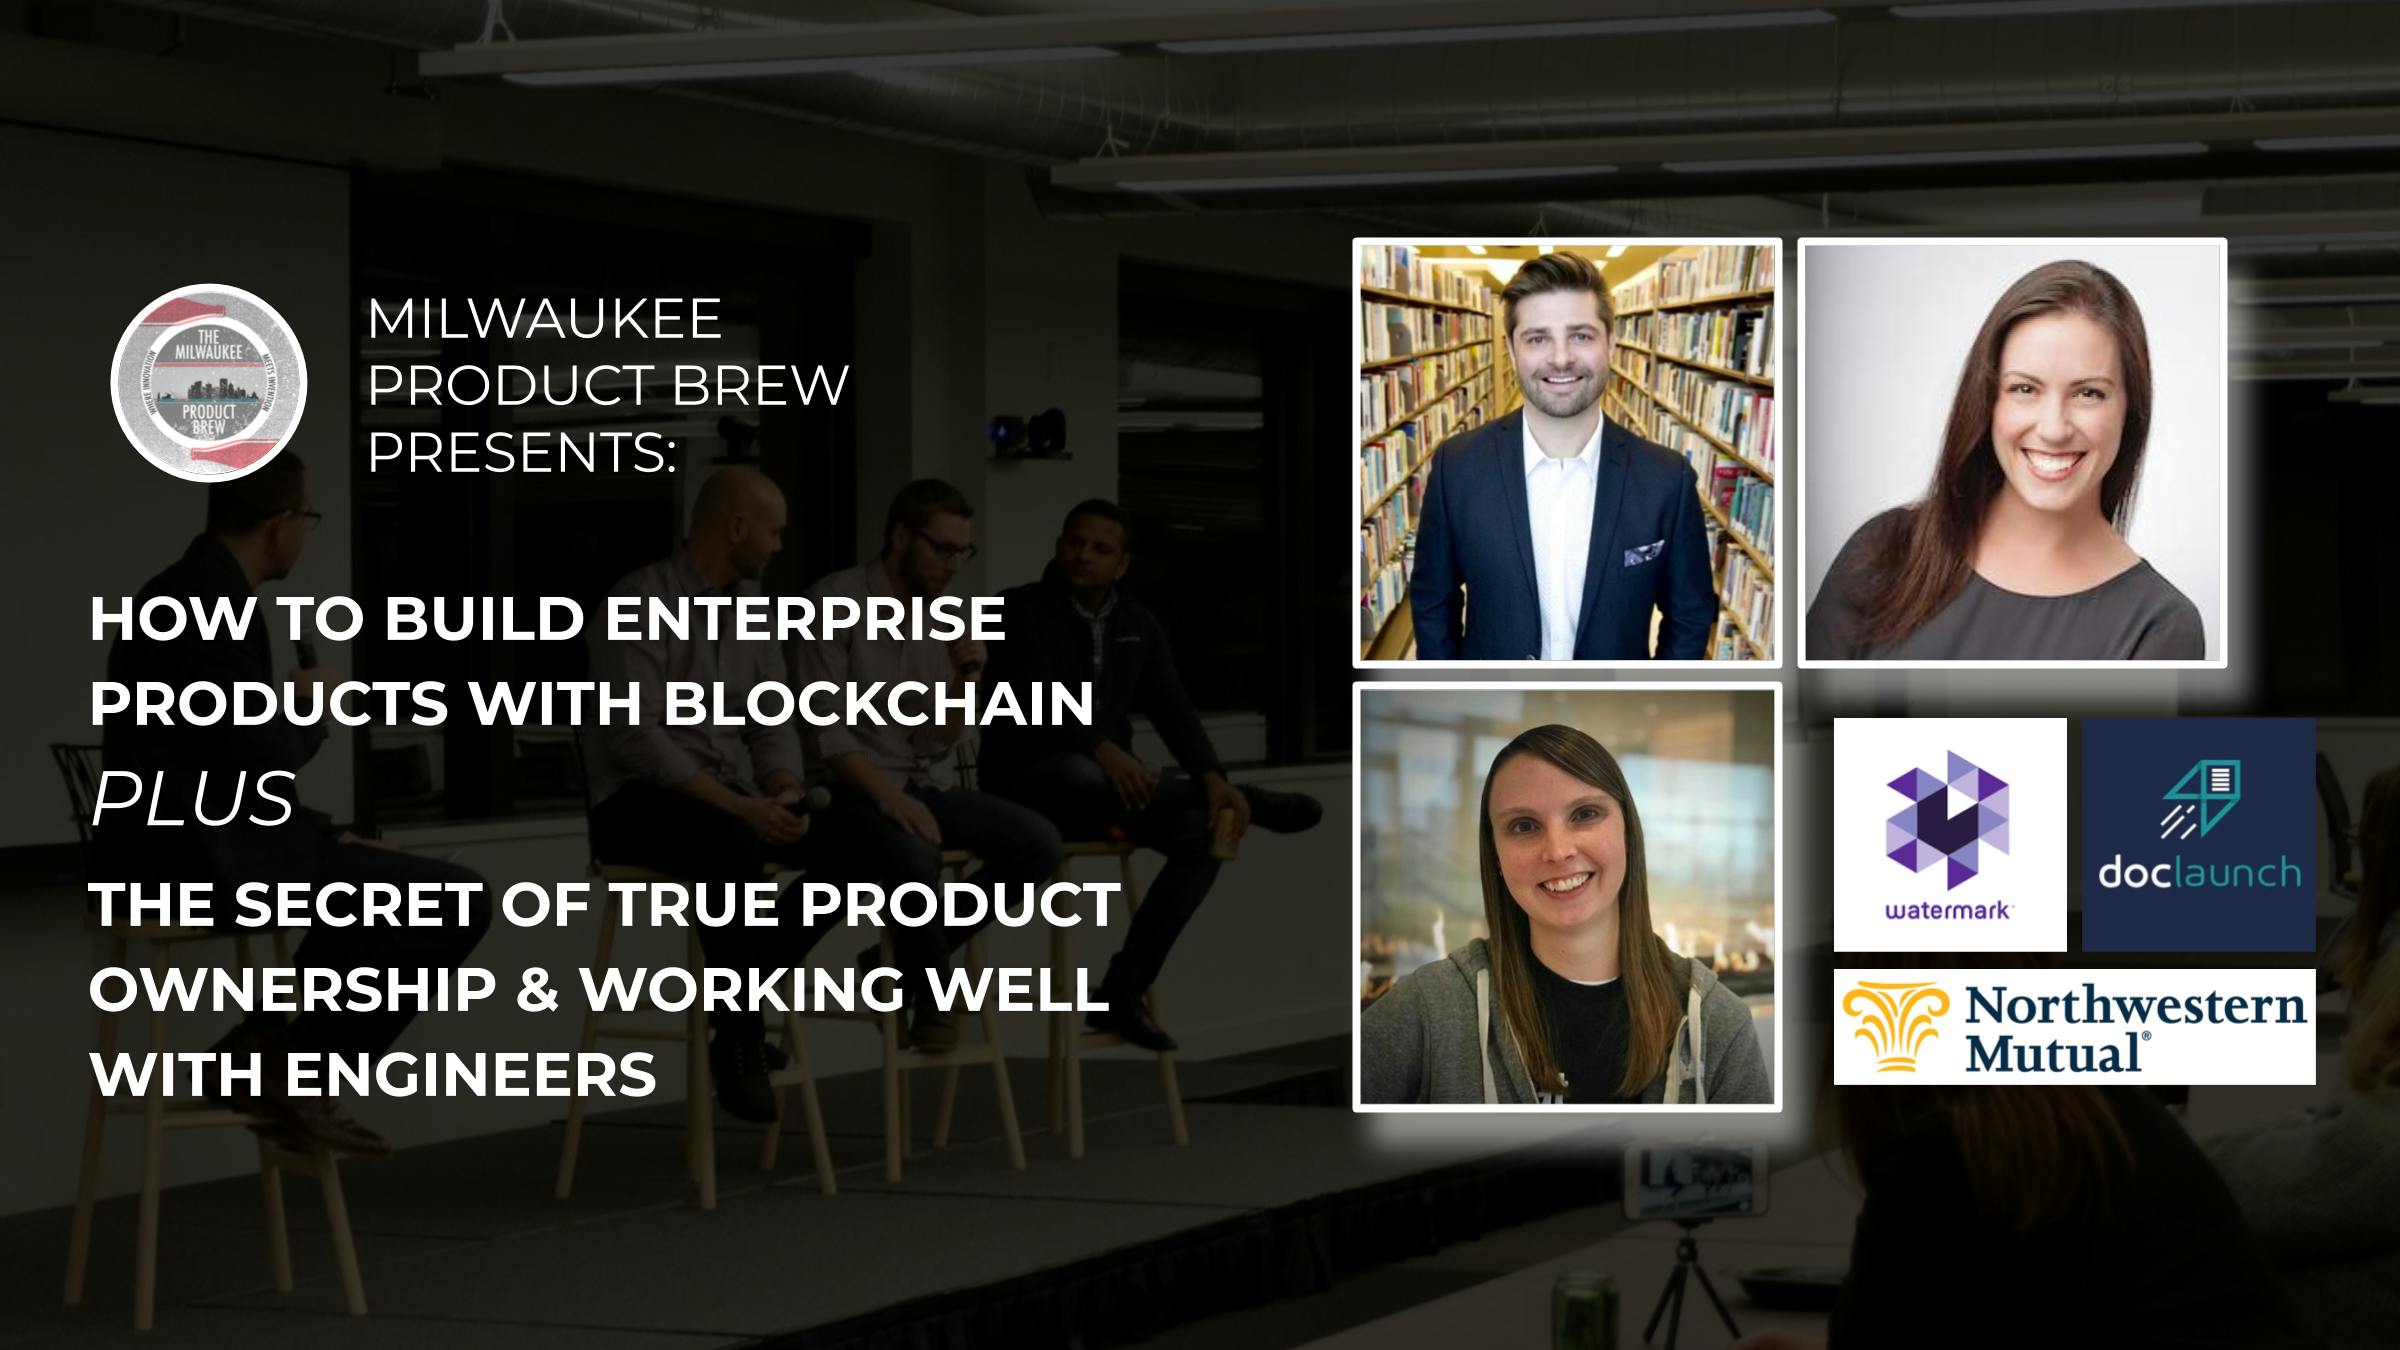 How to Build Enterprise Products with Blockchain Plus True Product Ownership